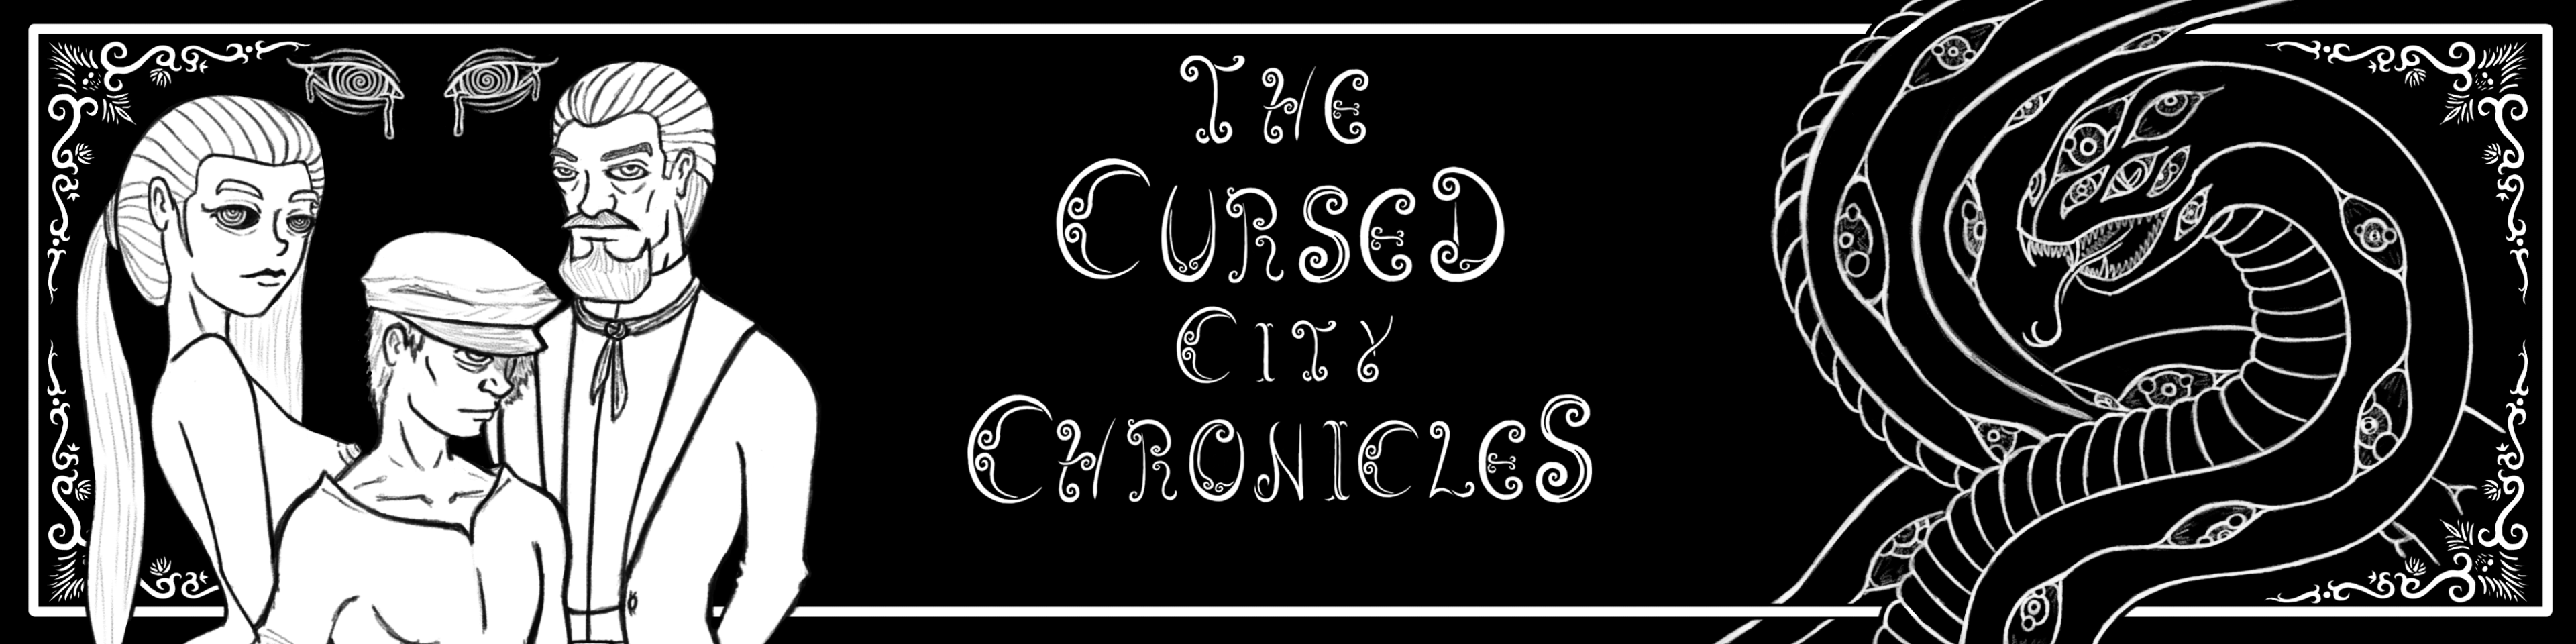 The Cursed City Chronicles poster